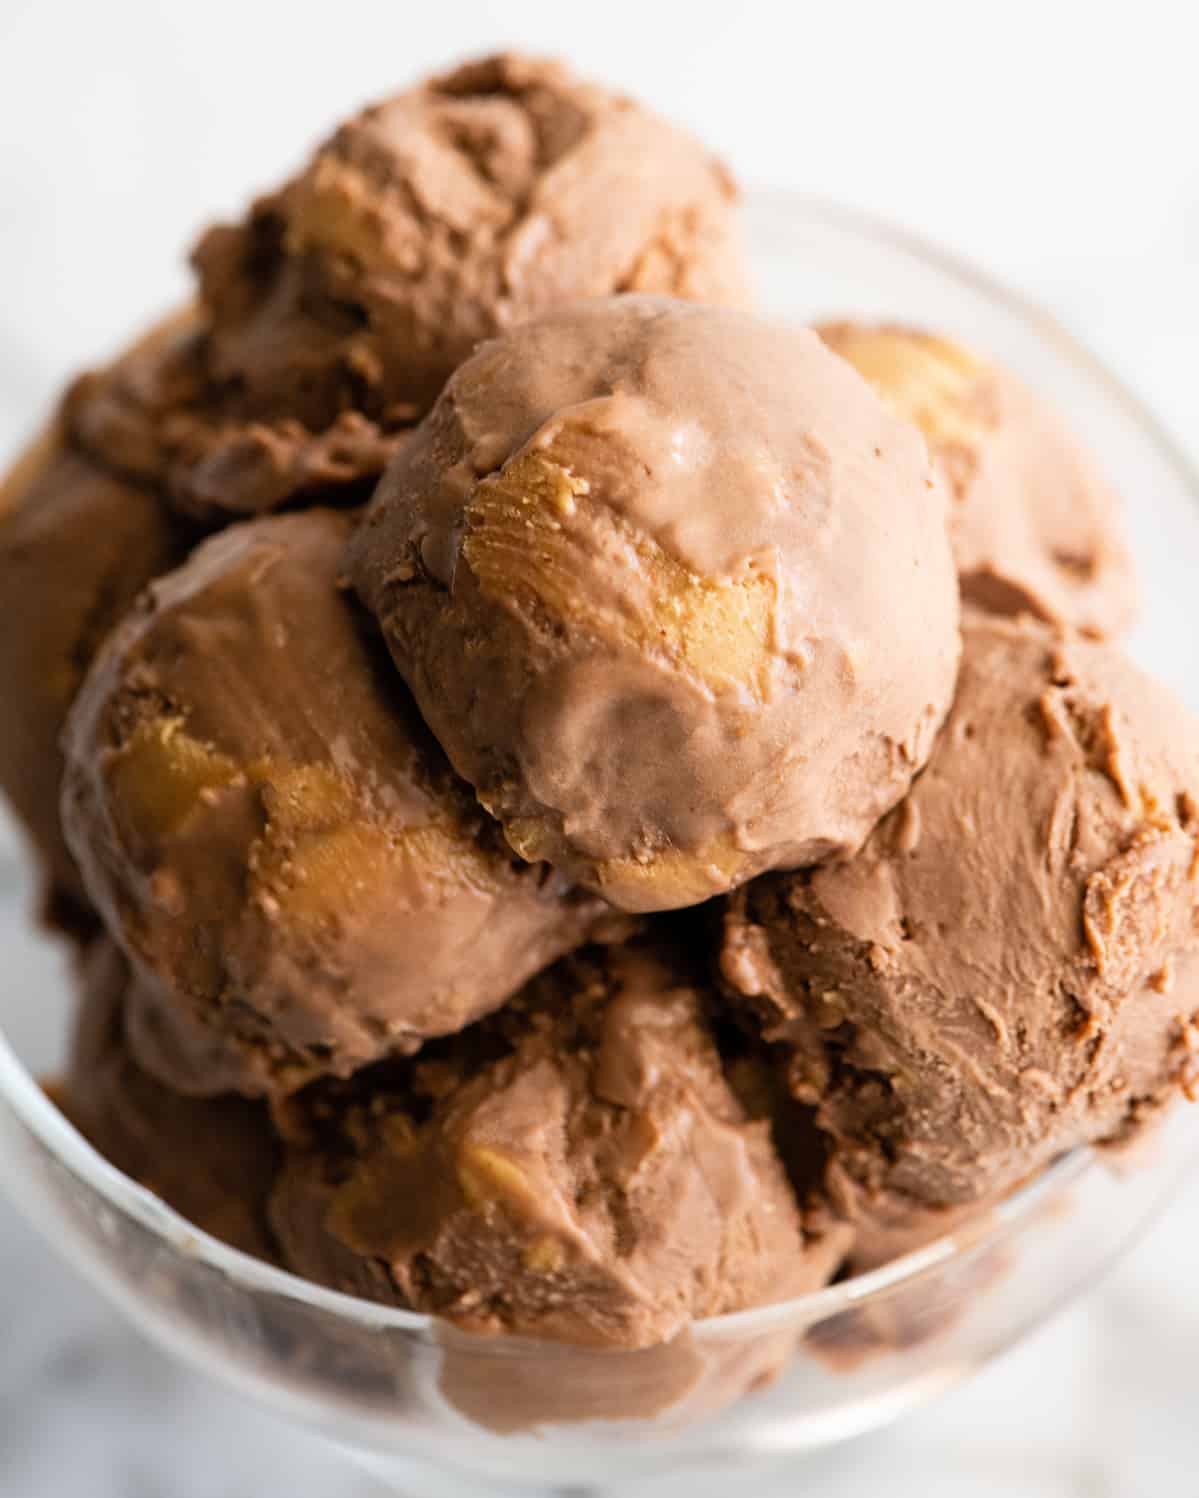 up close photo of scoops of Homemade Chocolate Peanut Butter Ice Cream in a glass dish